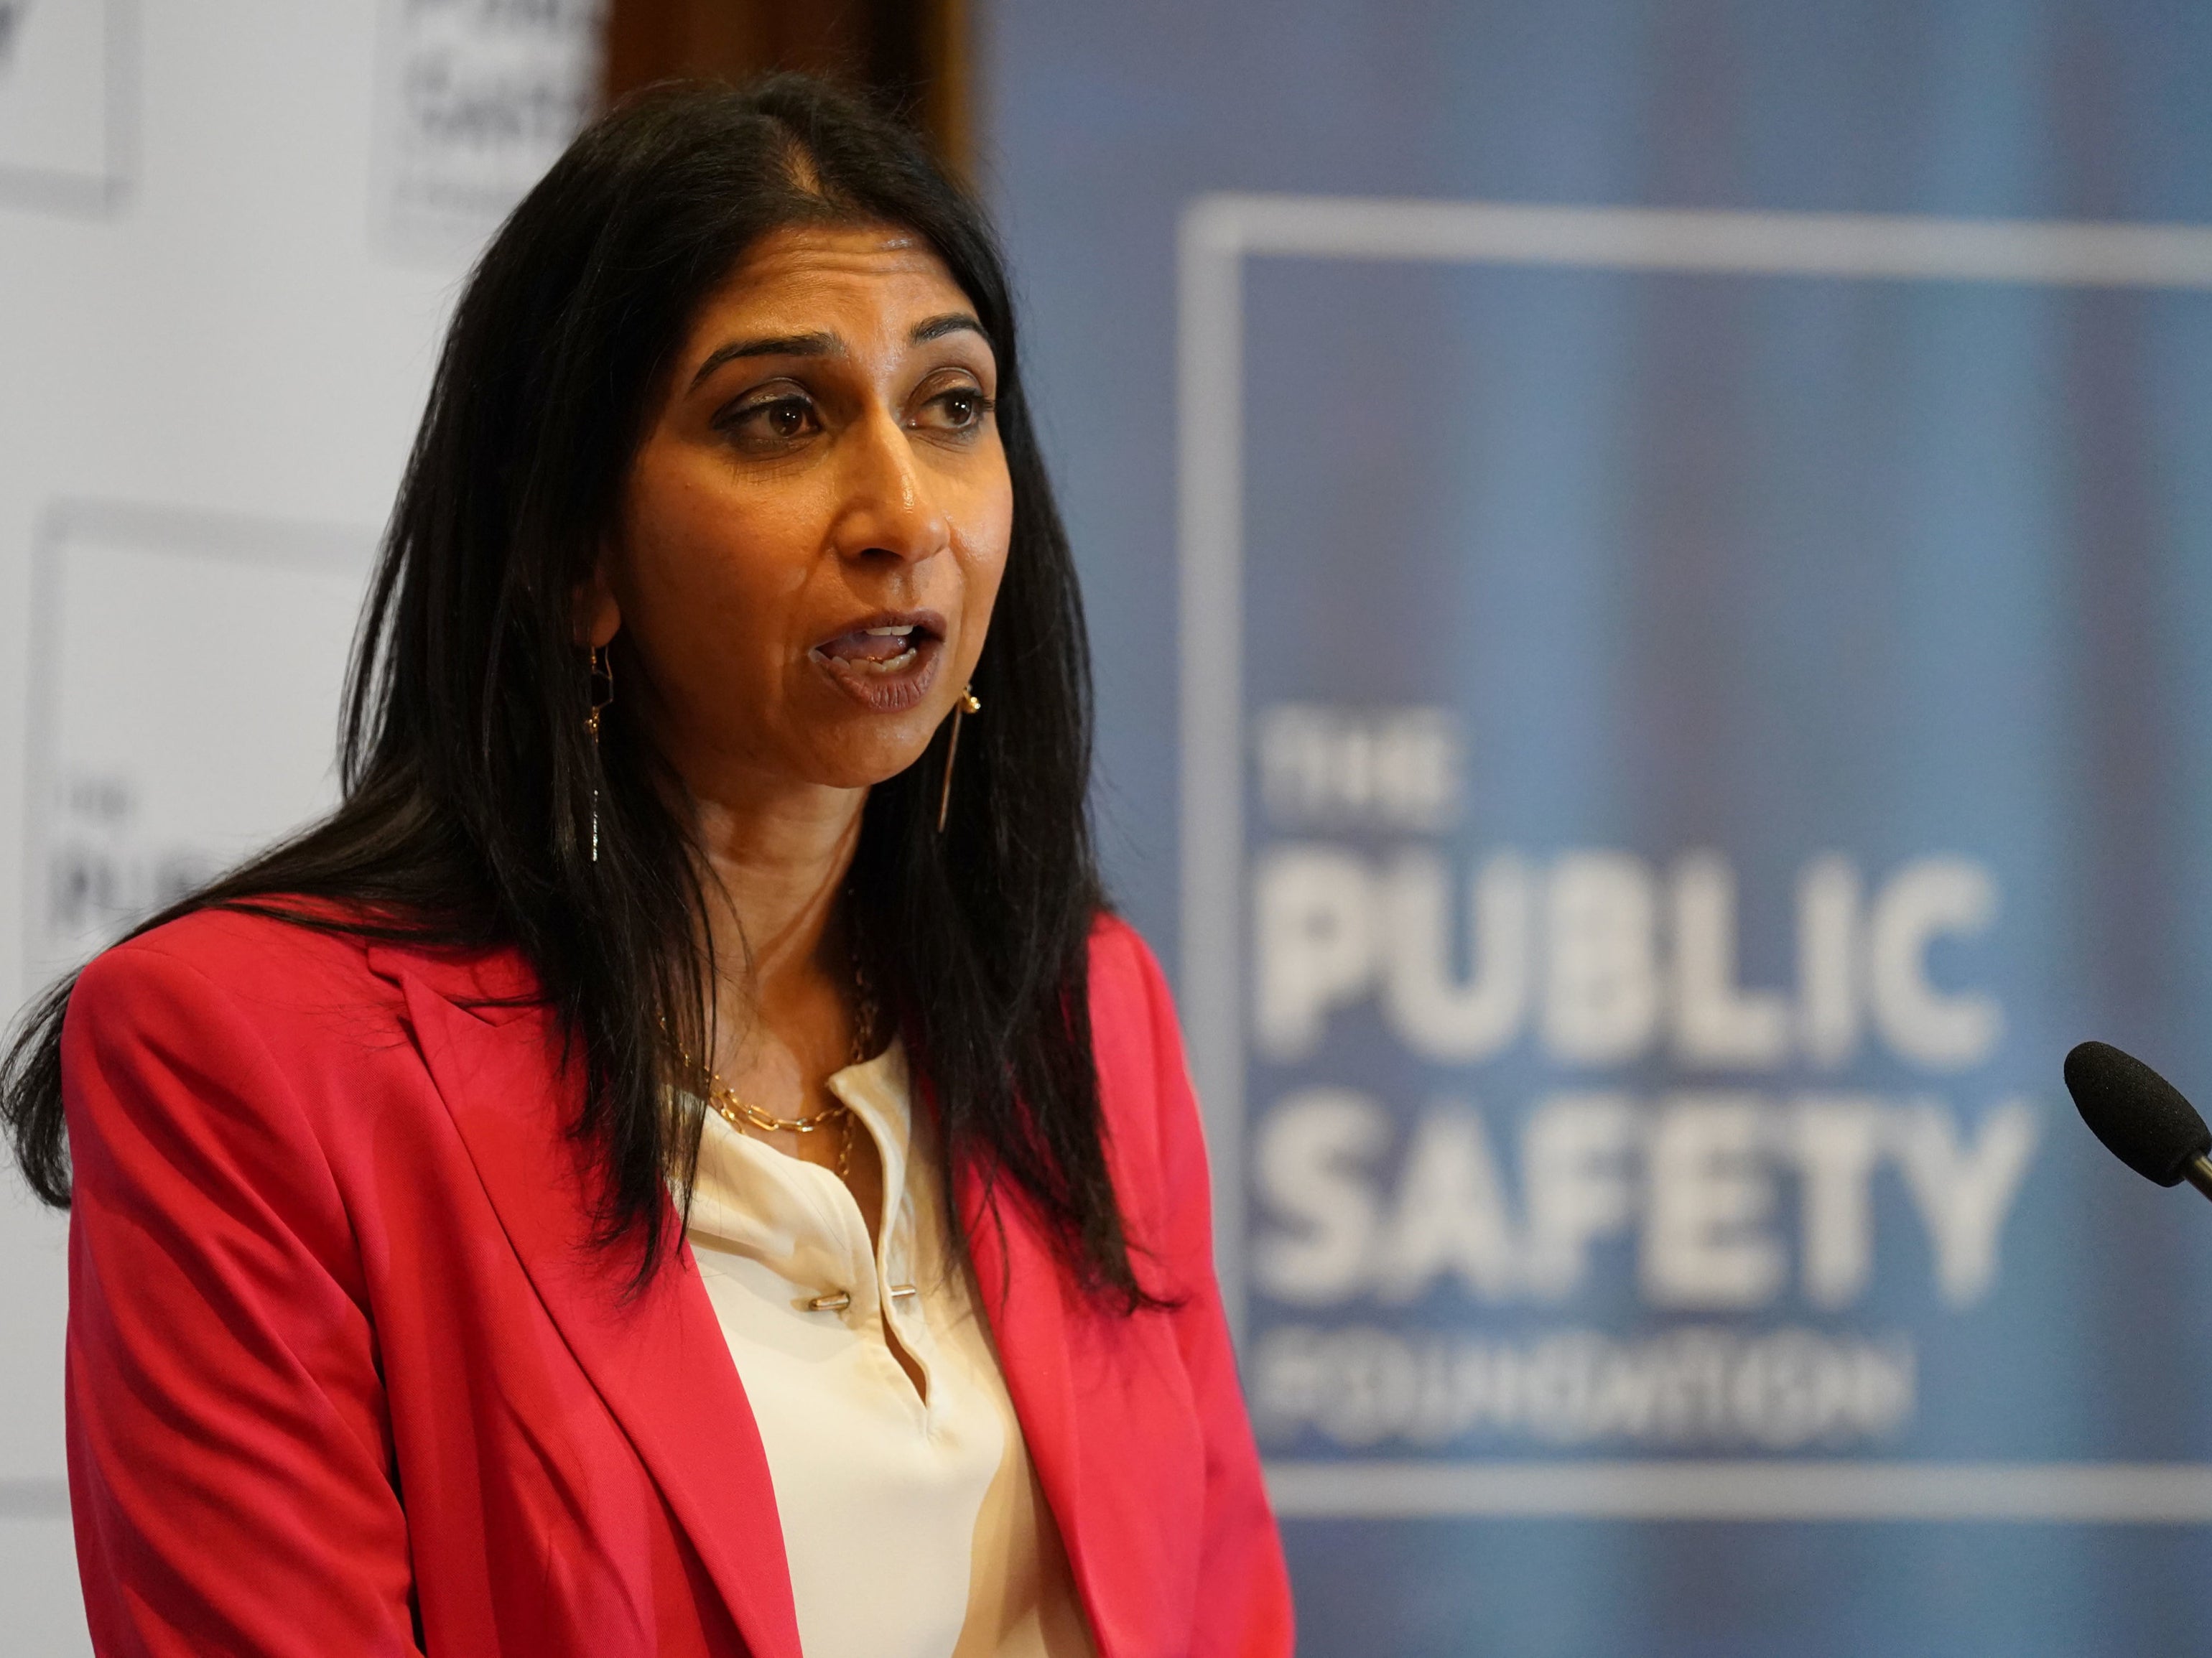 Home Secretary Suella Braverman delivers a speech on policing at the Public Safety Foundation think tank in central London on 26 April 2022